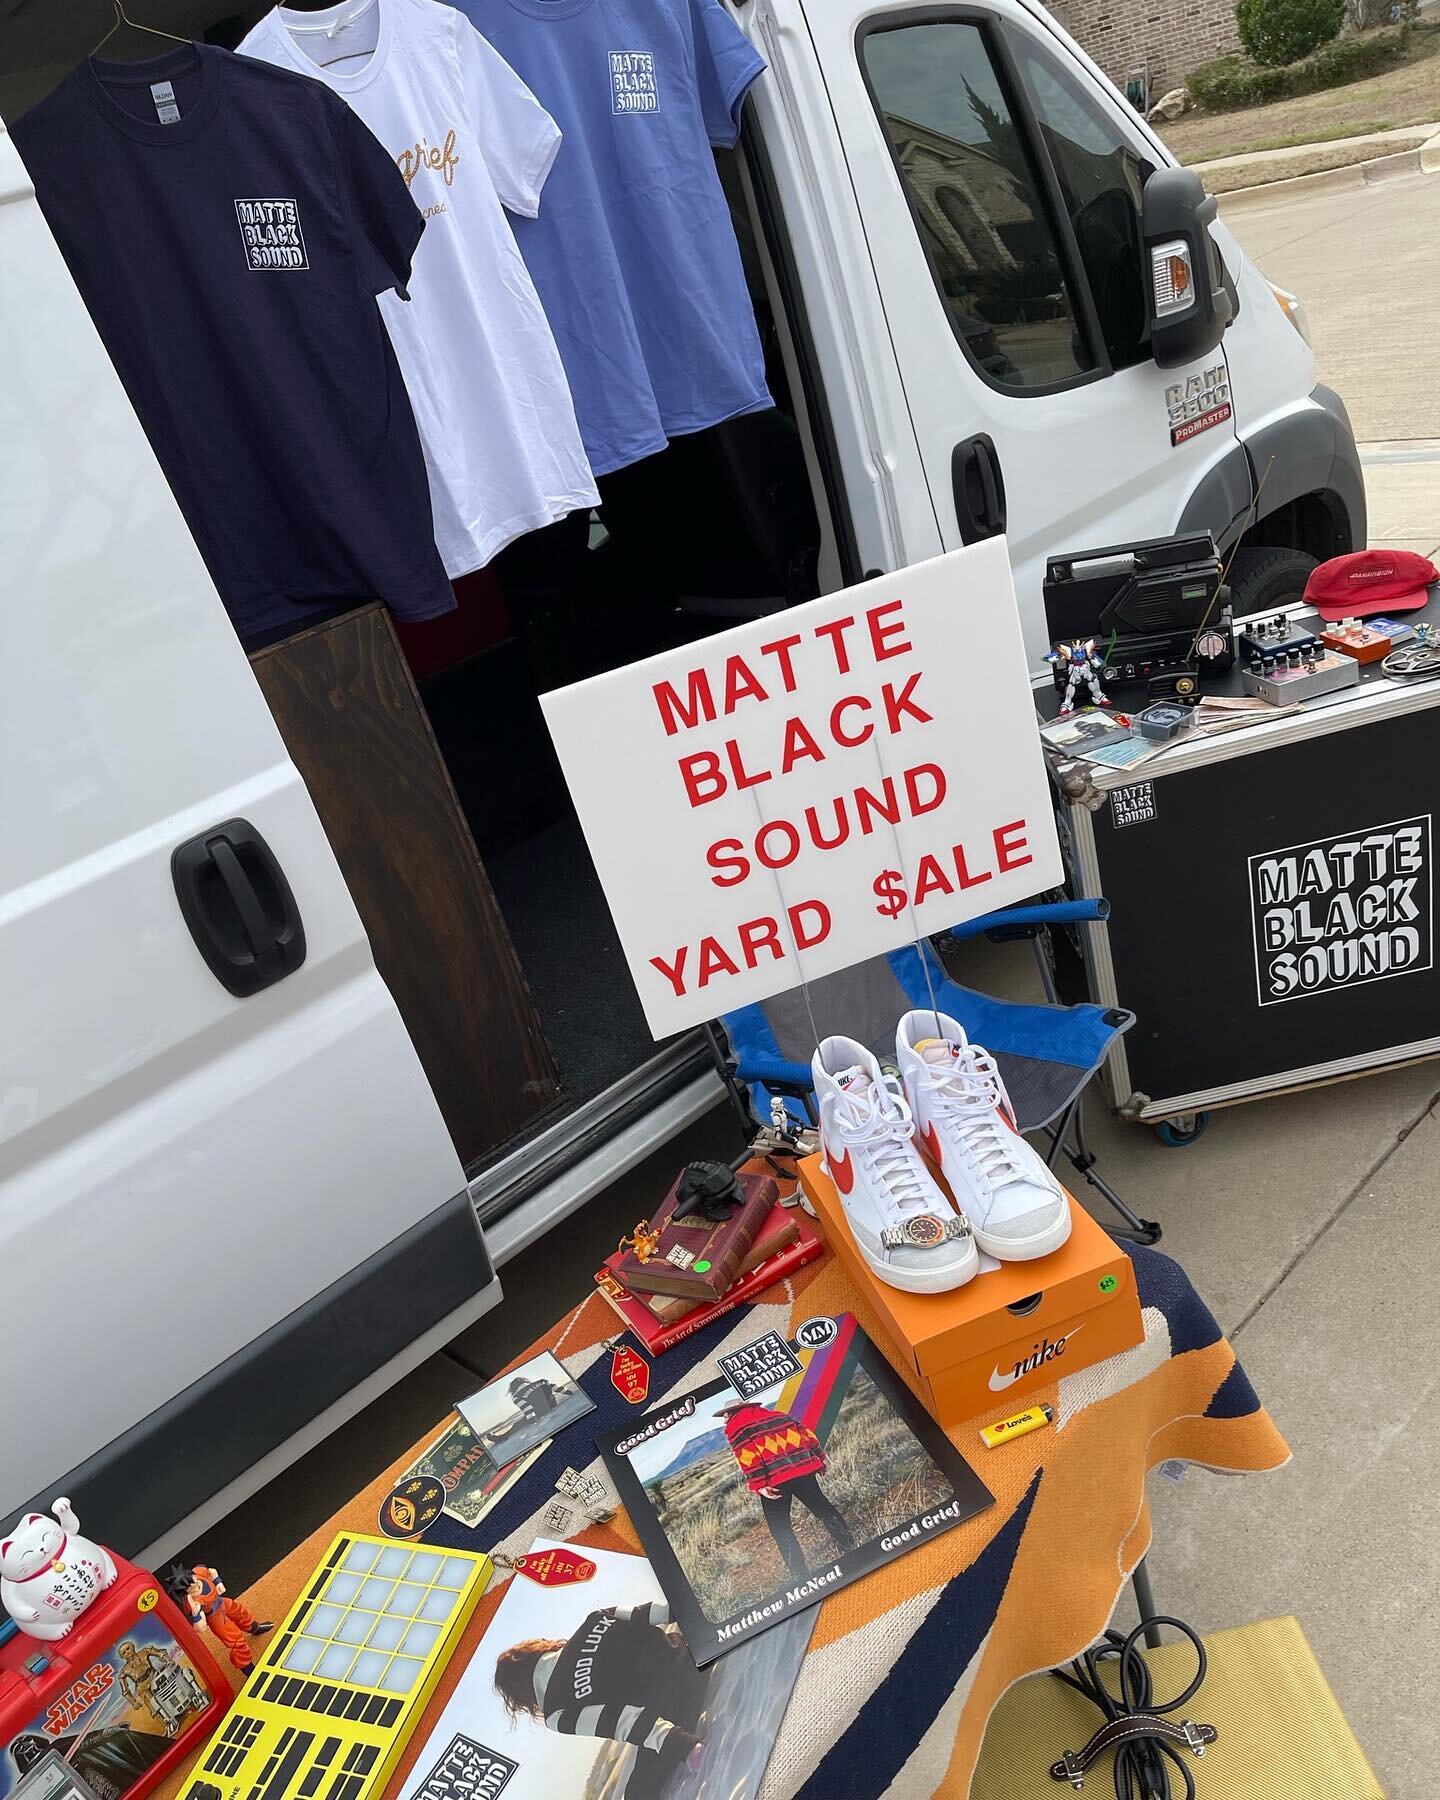 Y&rsquo;all rule. The MBSC Yard Sale has been so much fun, so we&rsquo;re keeping the low prices running until the end of the week. In the meantime, we&rsquo;ll be announcing our raffle winner and sharing some good news to celebrate! Stay tuned 📻